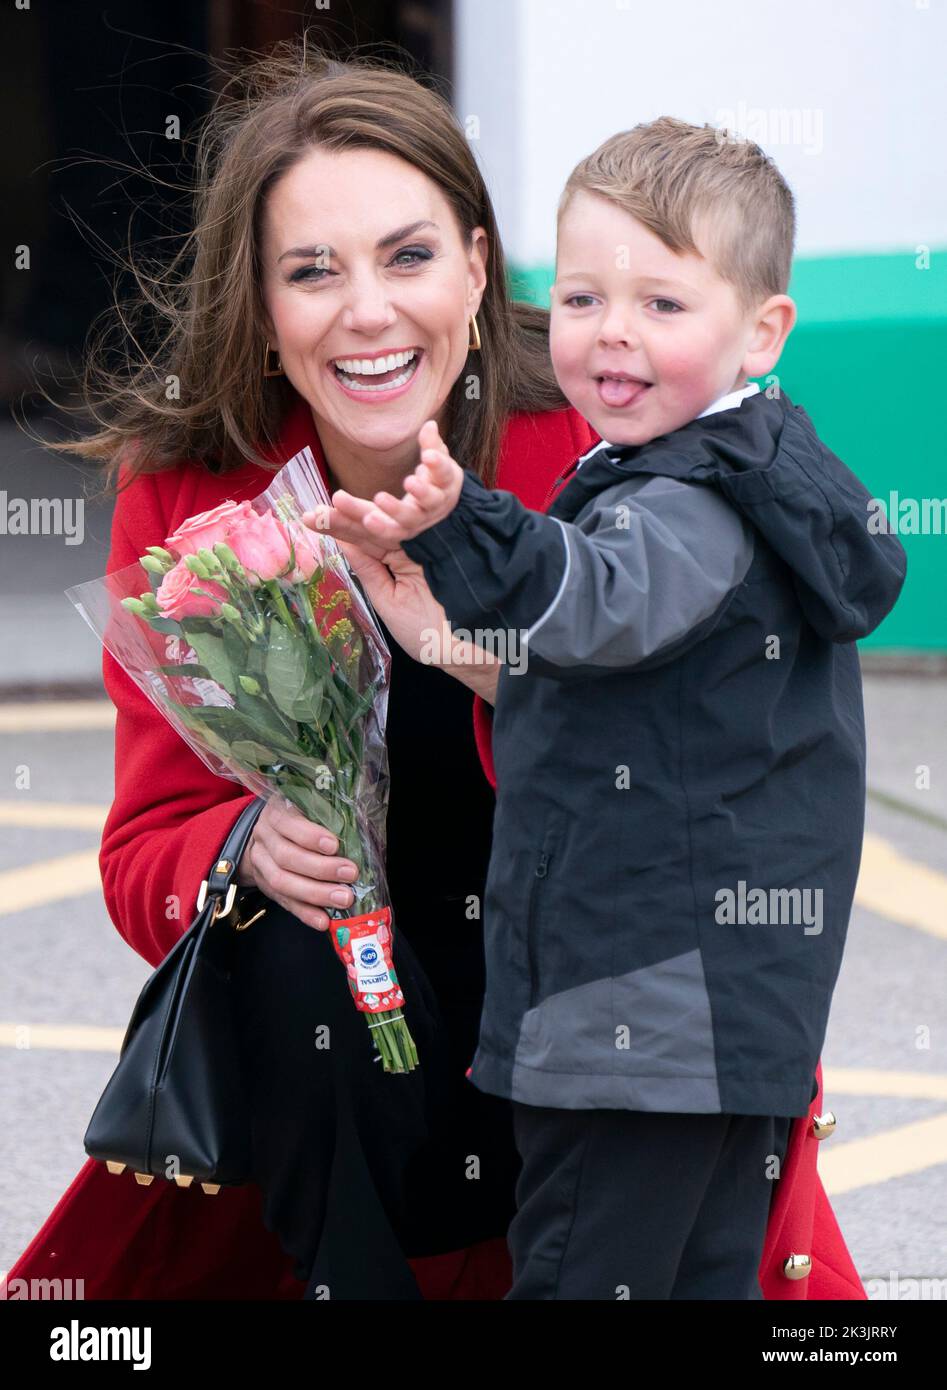 The Princess of Wales receives a posy of flowers from four-year-old Theo Crompton as she arrives for a visit to the RNLI Holyhead Lifeboat Station, in Holyhead, Wales, where with the Prince of Wales they are meeting crew, volunteers and some of those who have been supported by their local unit. Holyhead is one of the three oldest lifeboat stations on the Welsh coast and has a remarkable history of bravery, having received 70 awards for gallantry. Picture date: Tuesday September 27, 2022. Stock Photo